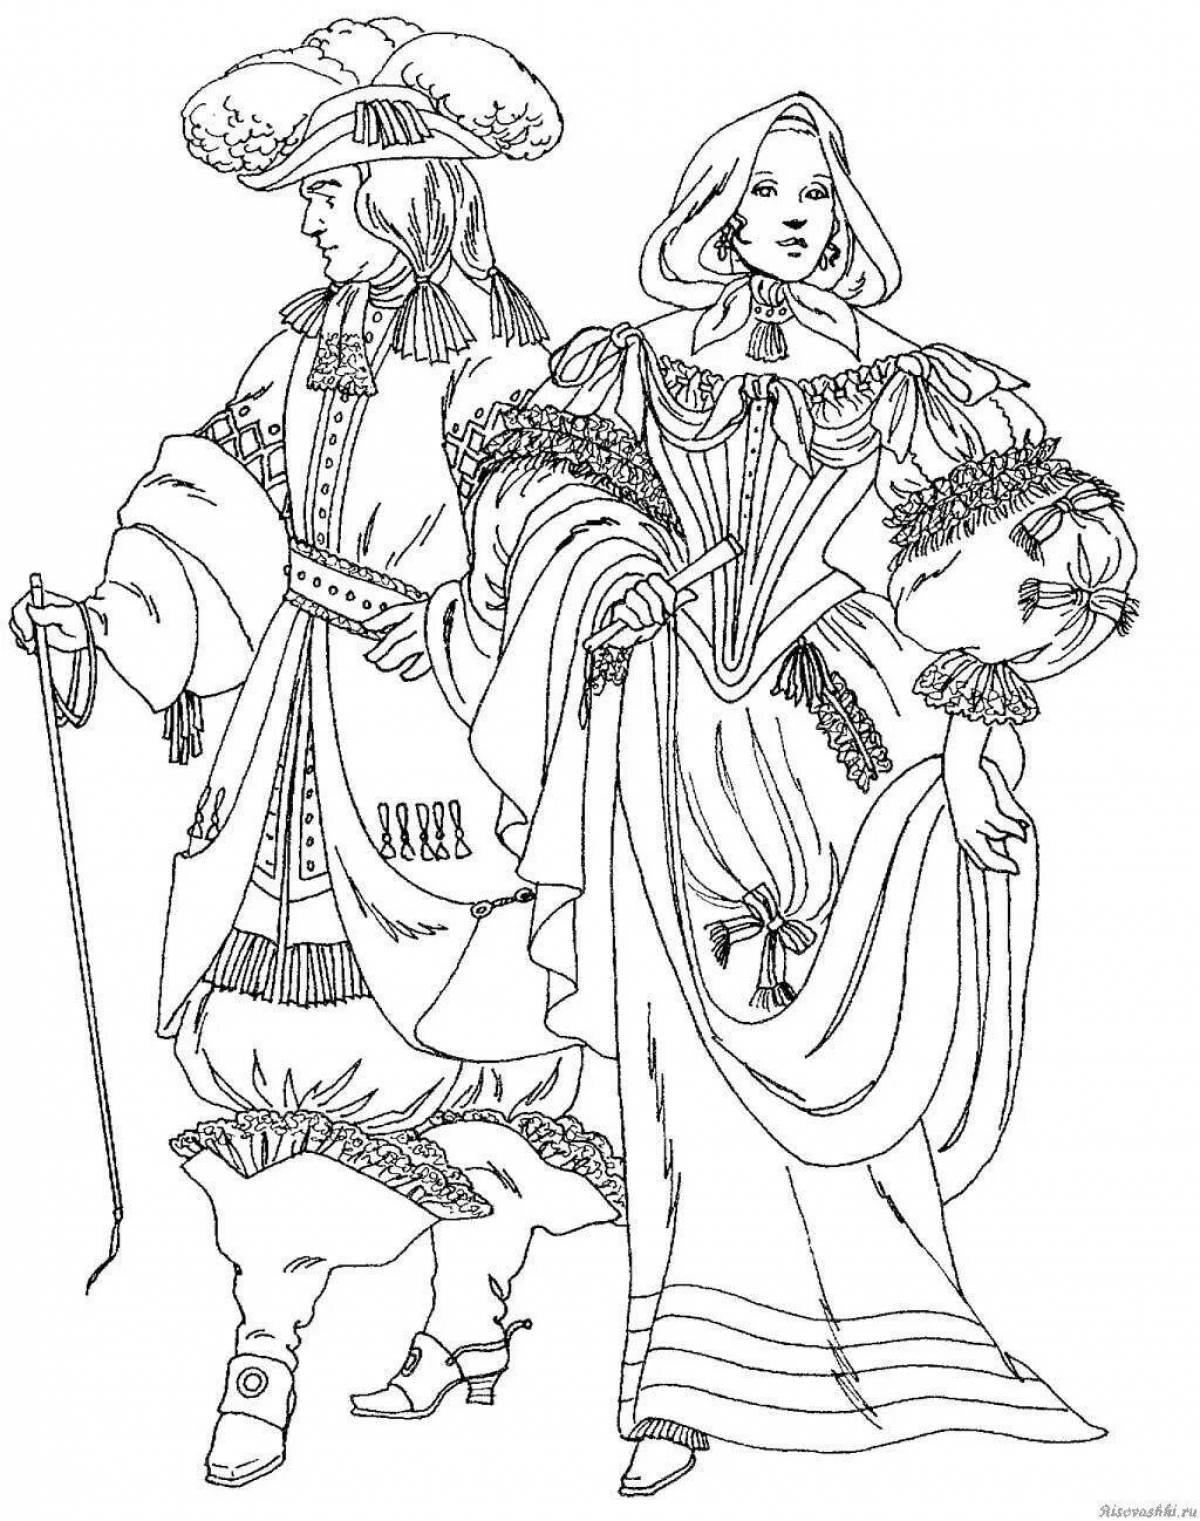 Exquisite historical coloring book for kids